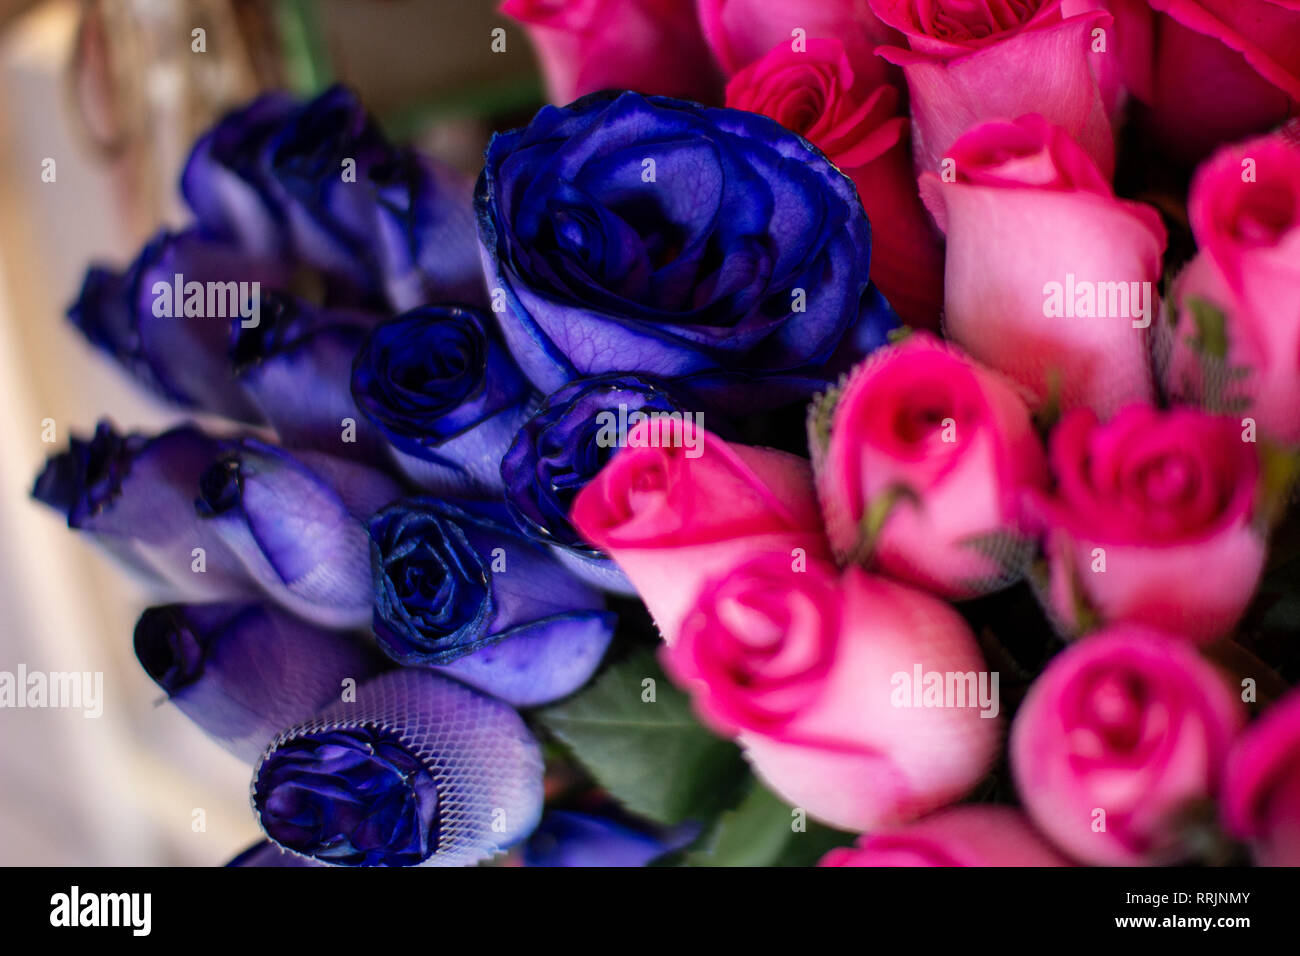 Colorful natural fresh blue and pink roses at florist shop Stock ...